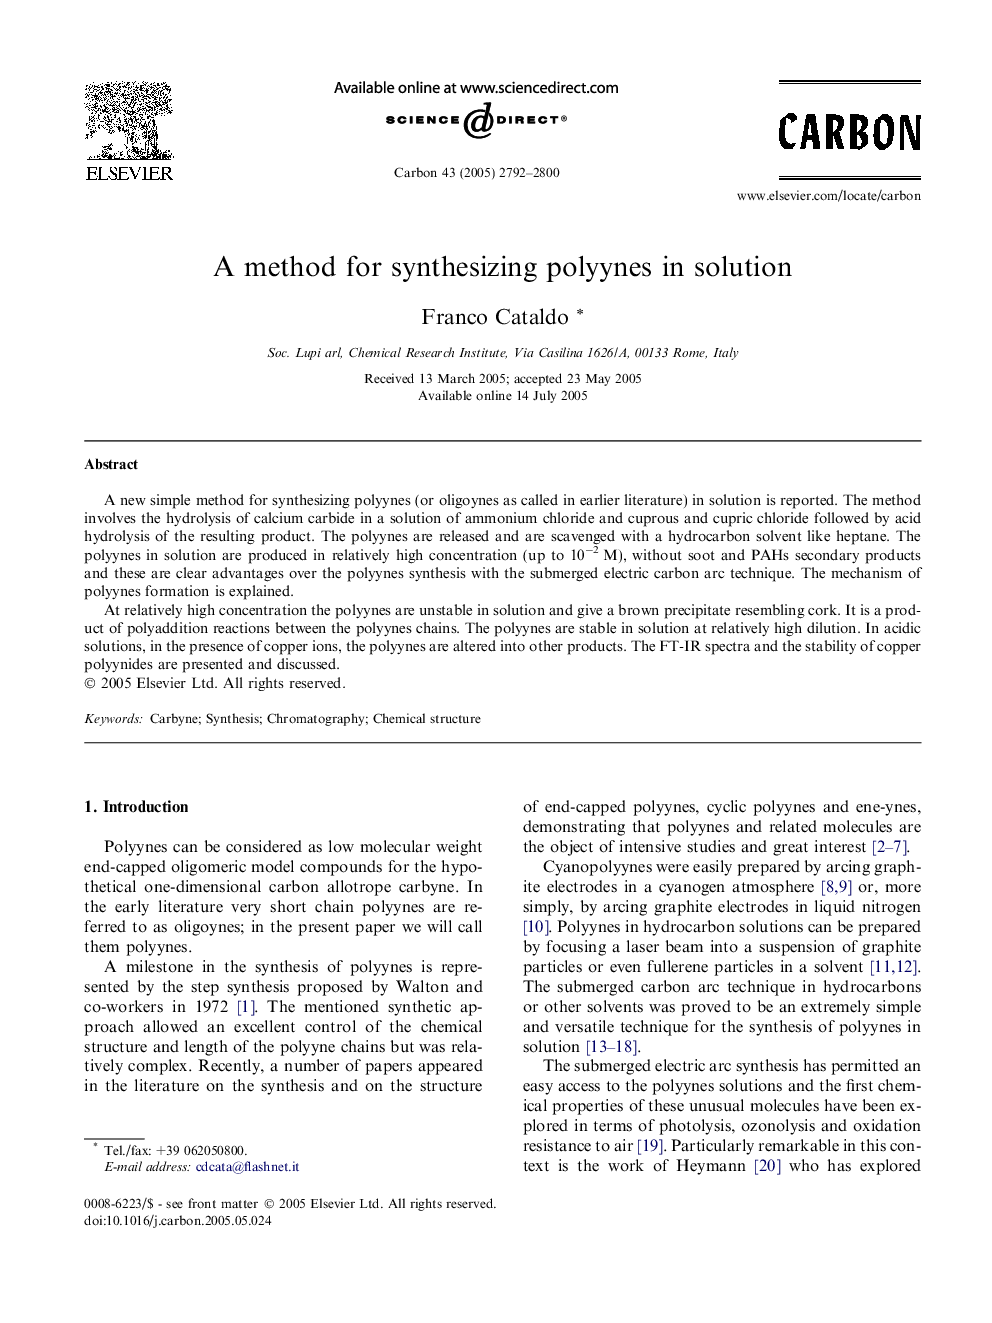 A method for synthesizing polyynes in solution